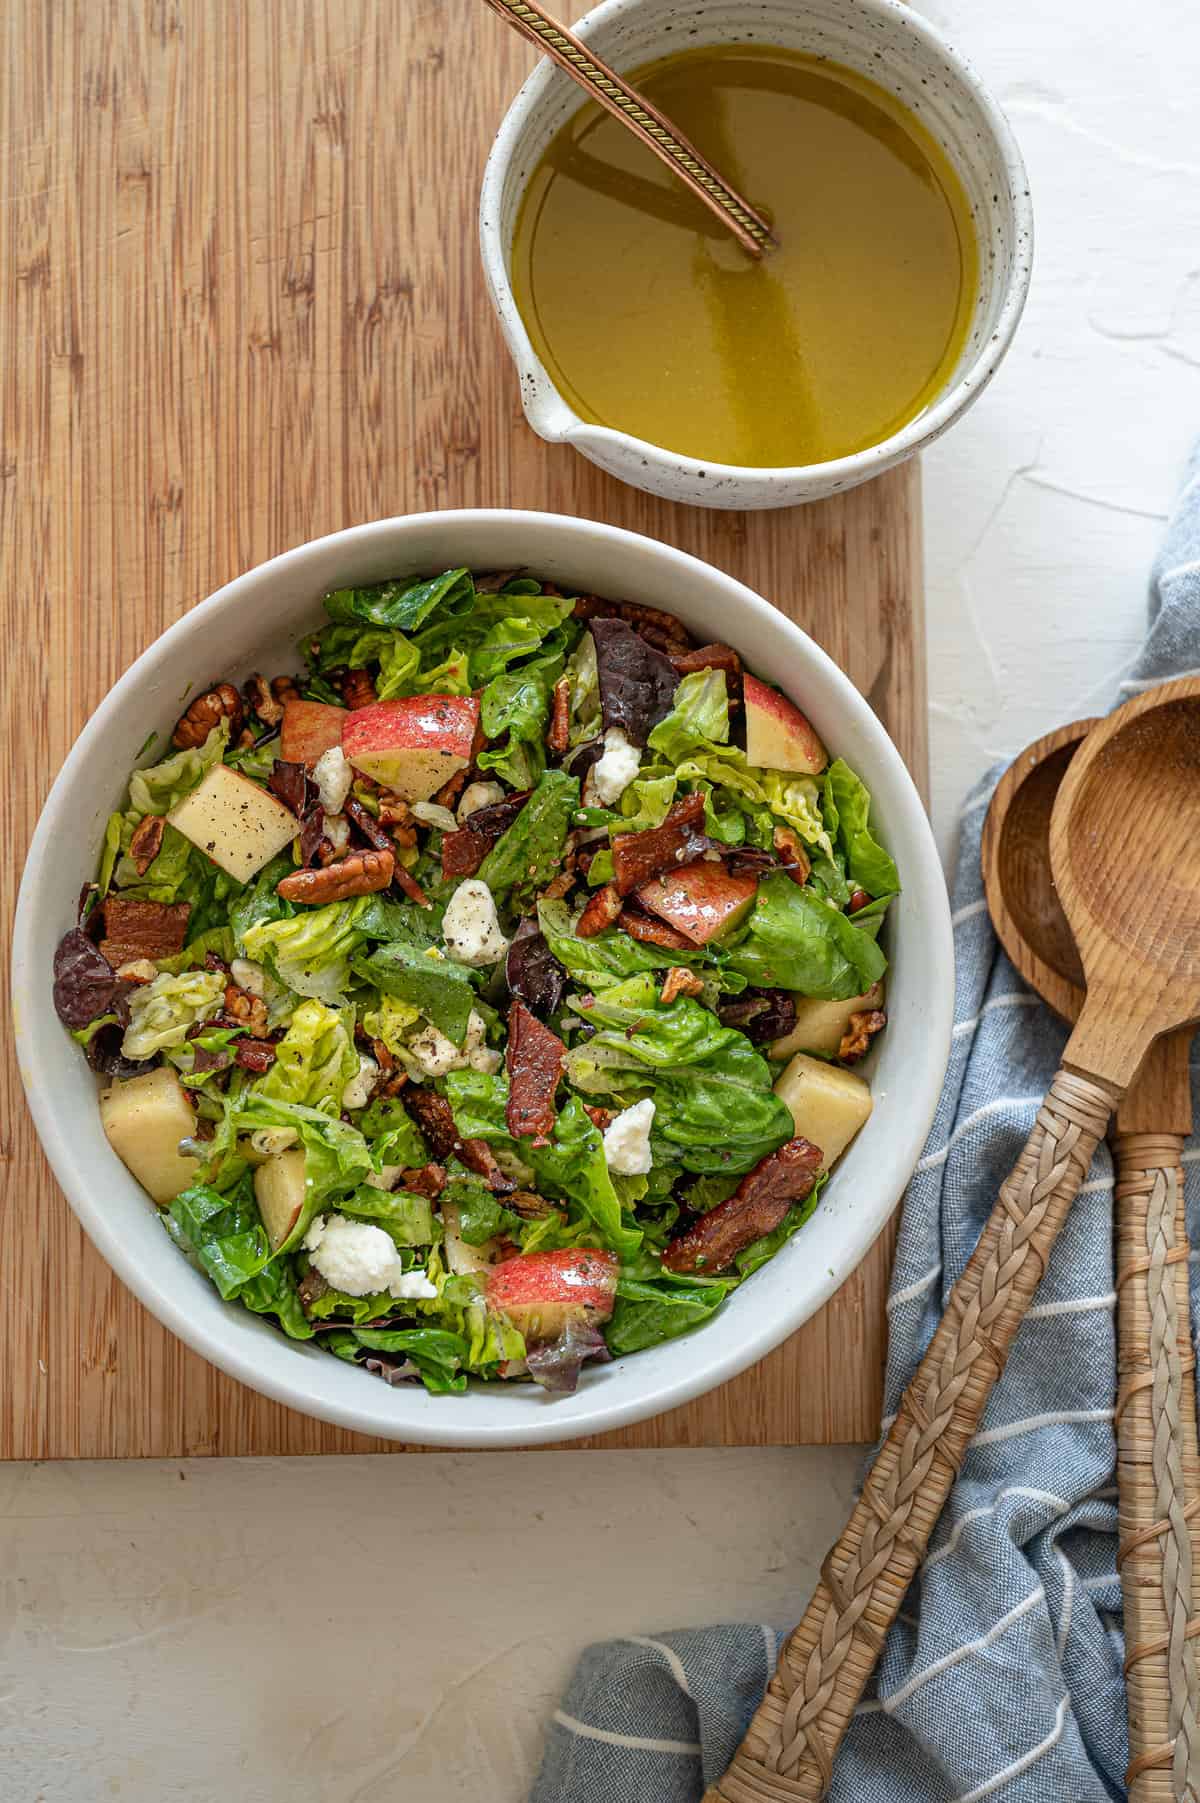 Autumn Salad tossed with apple cider vinaigrette in a white bowl on a wooden cutting board.